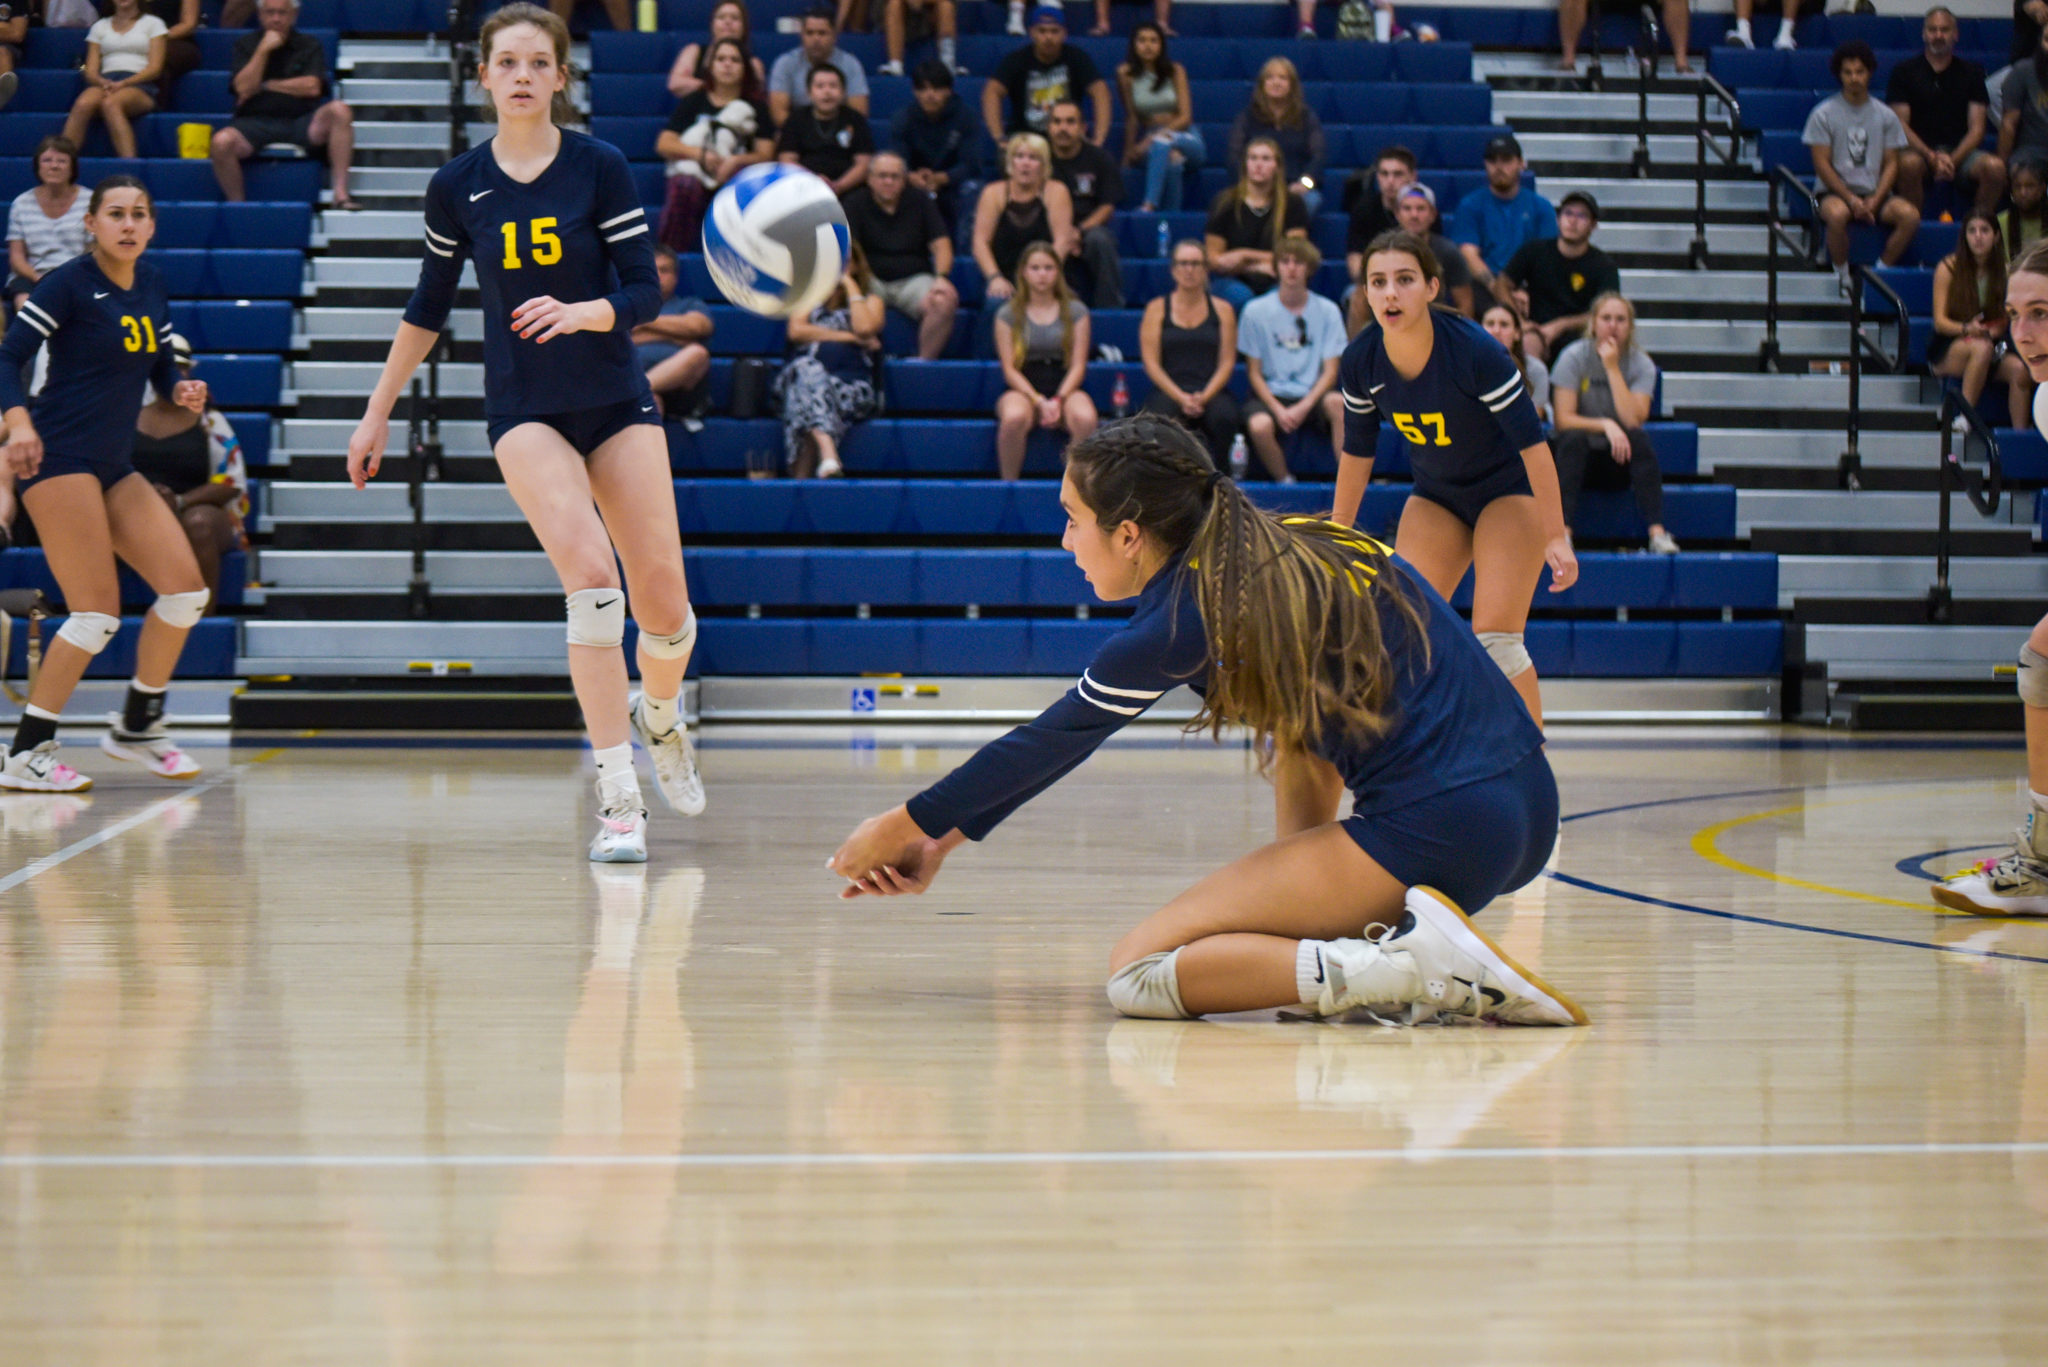 College of the Canyons women's volleyball stock image.